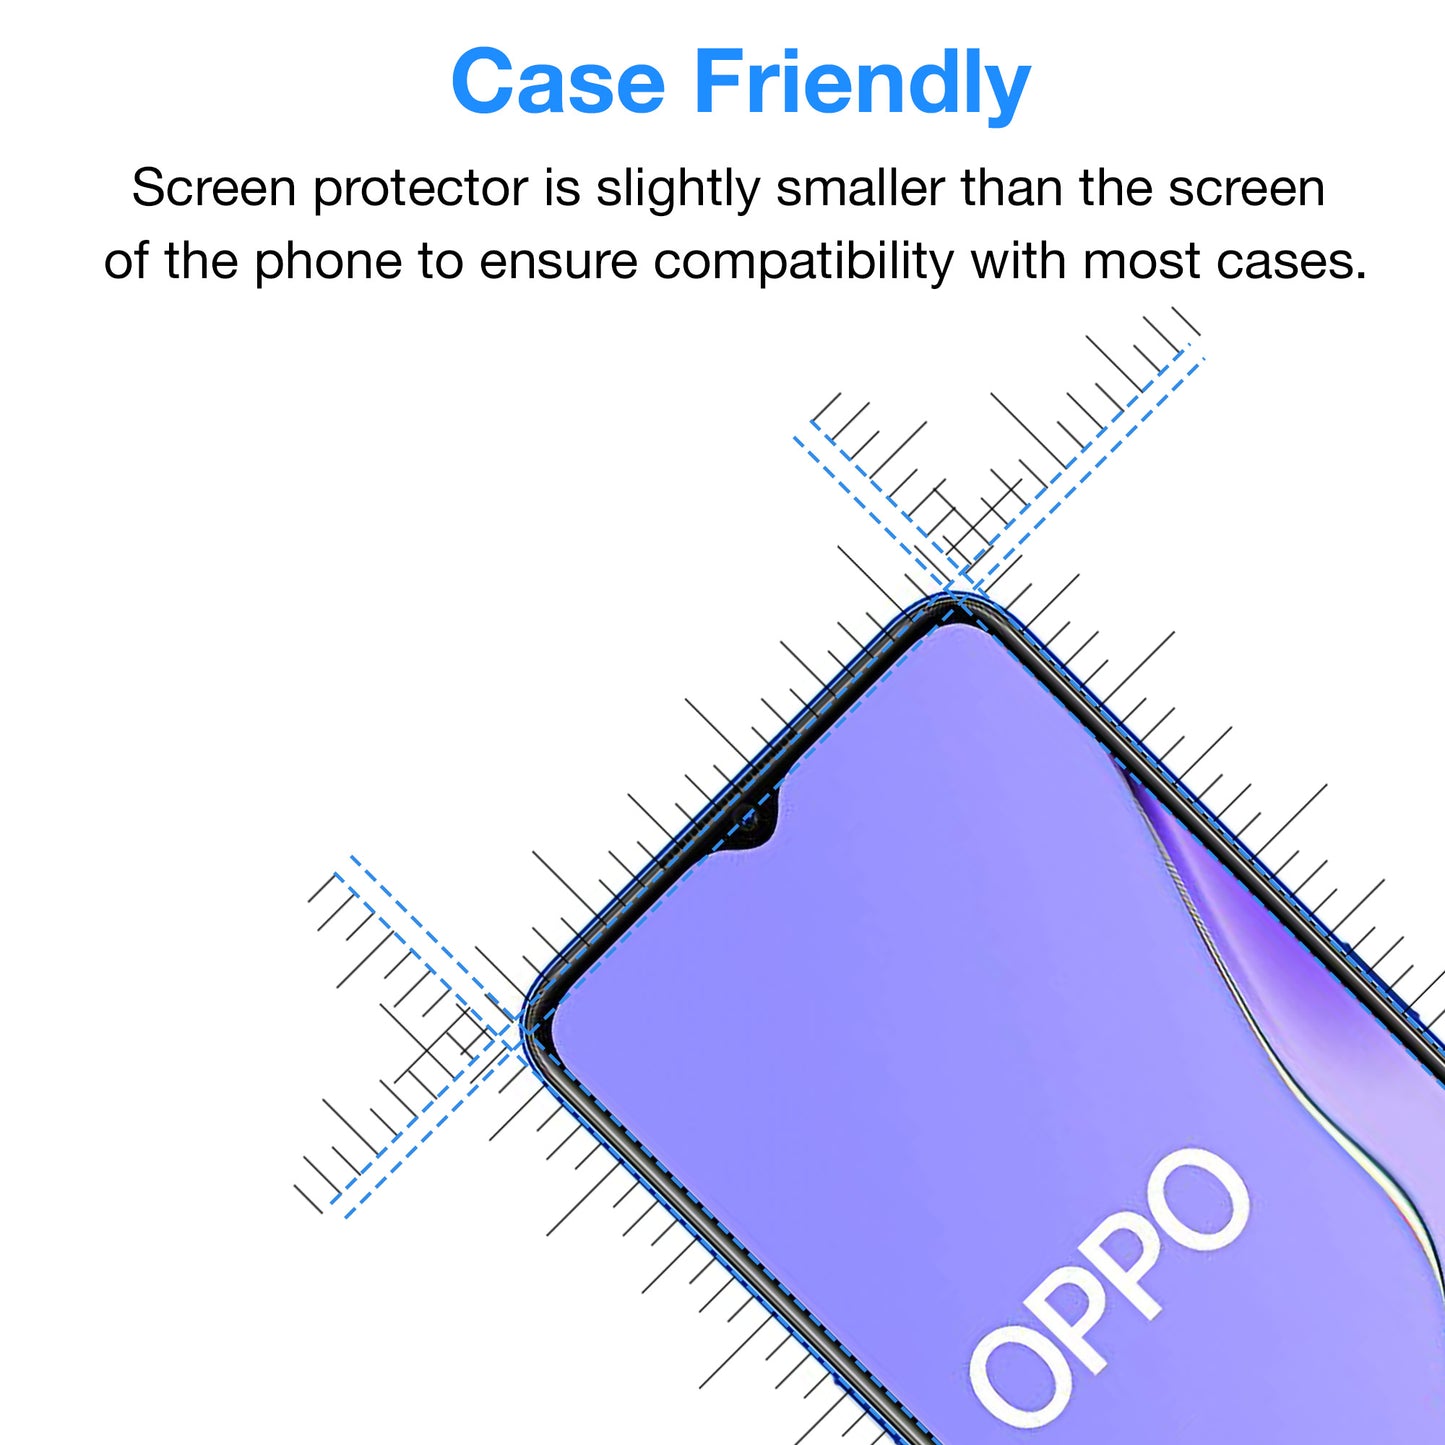 [2 Pack] MEZON OPPO A9 2020 Tempered Glass 9H HD Crystal Clear Premium Case Friendly Screen Protector (A9 2020, 9H)